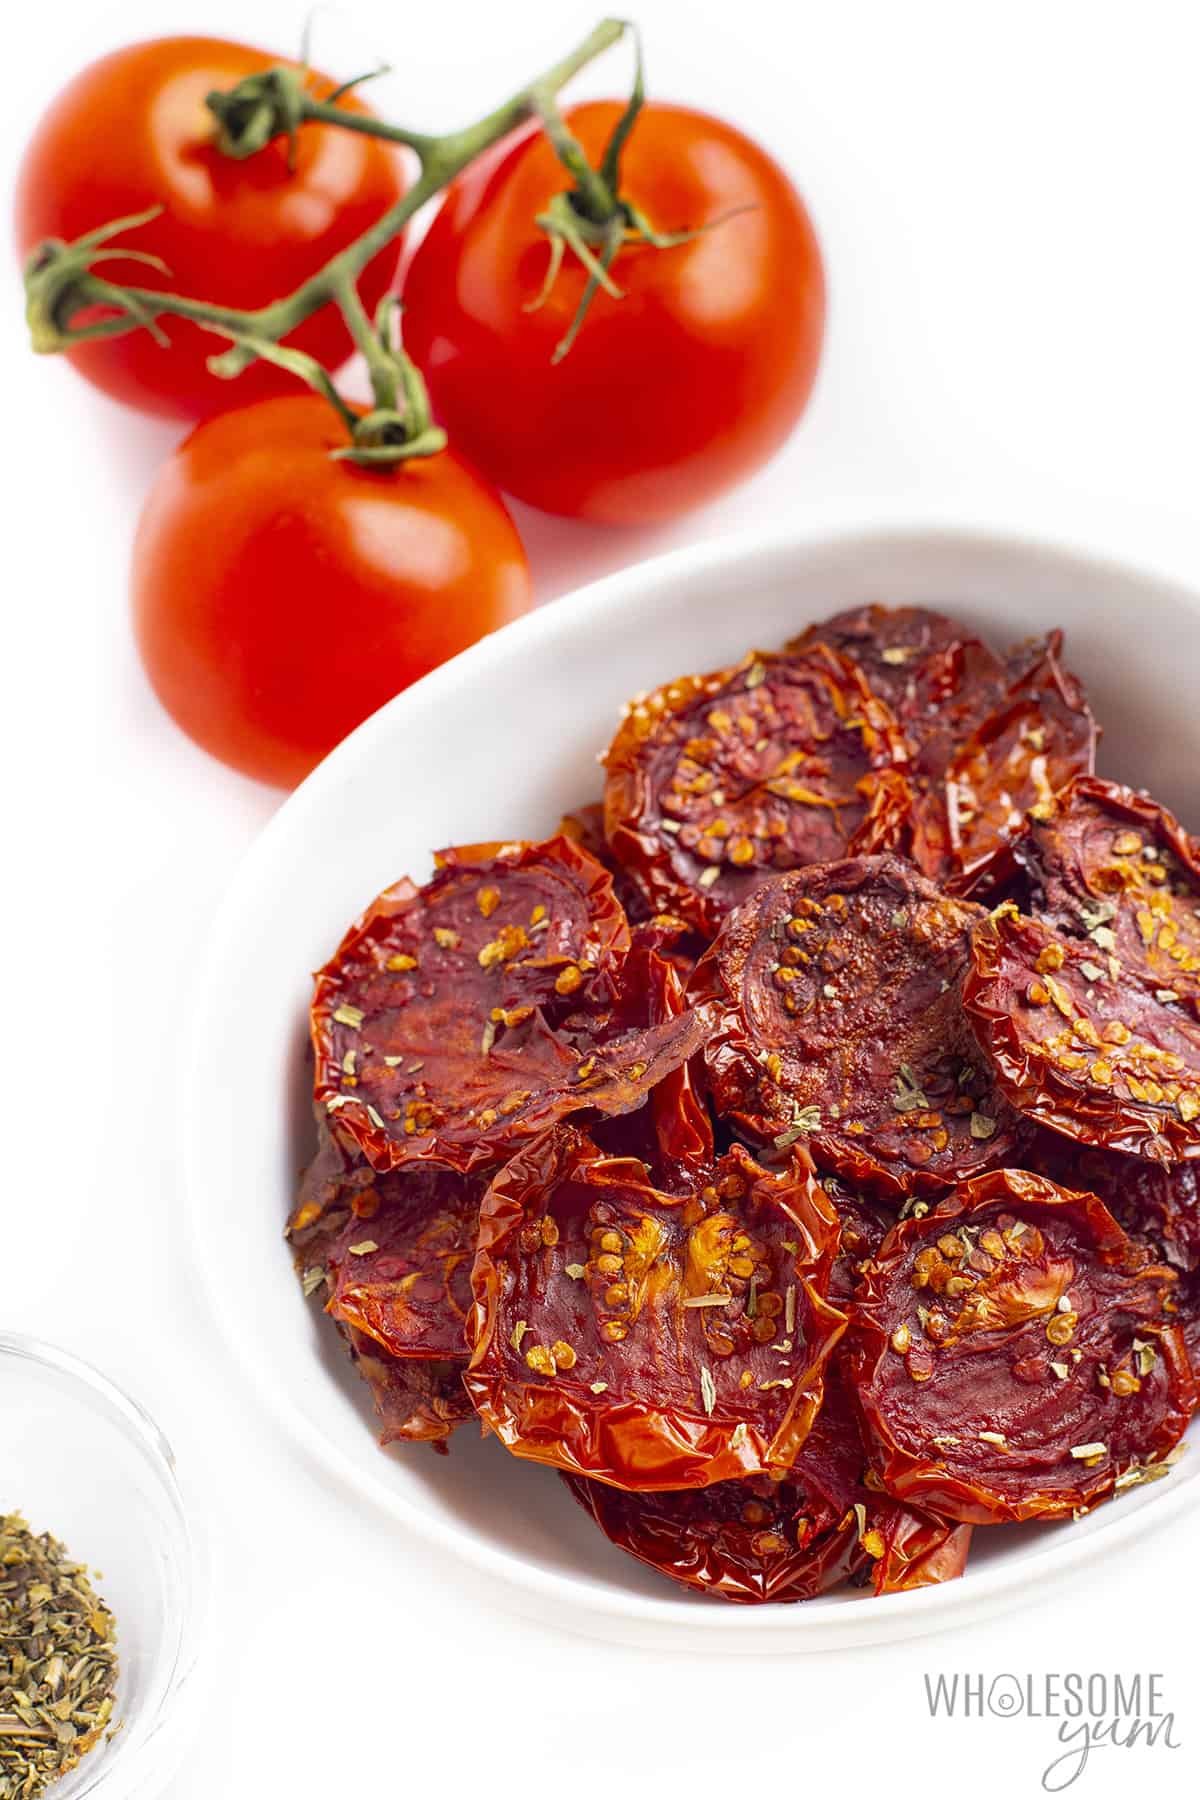 Bowl of sun-dried tomatoes with fresh tomatoes in background.